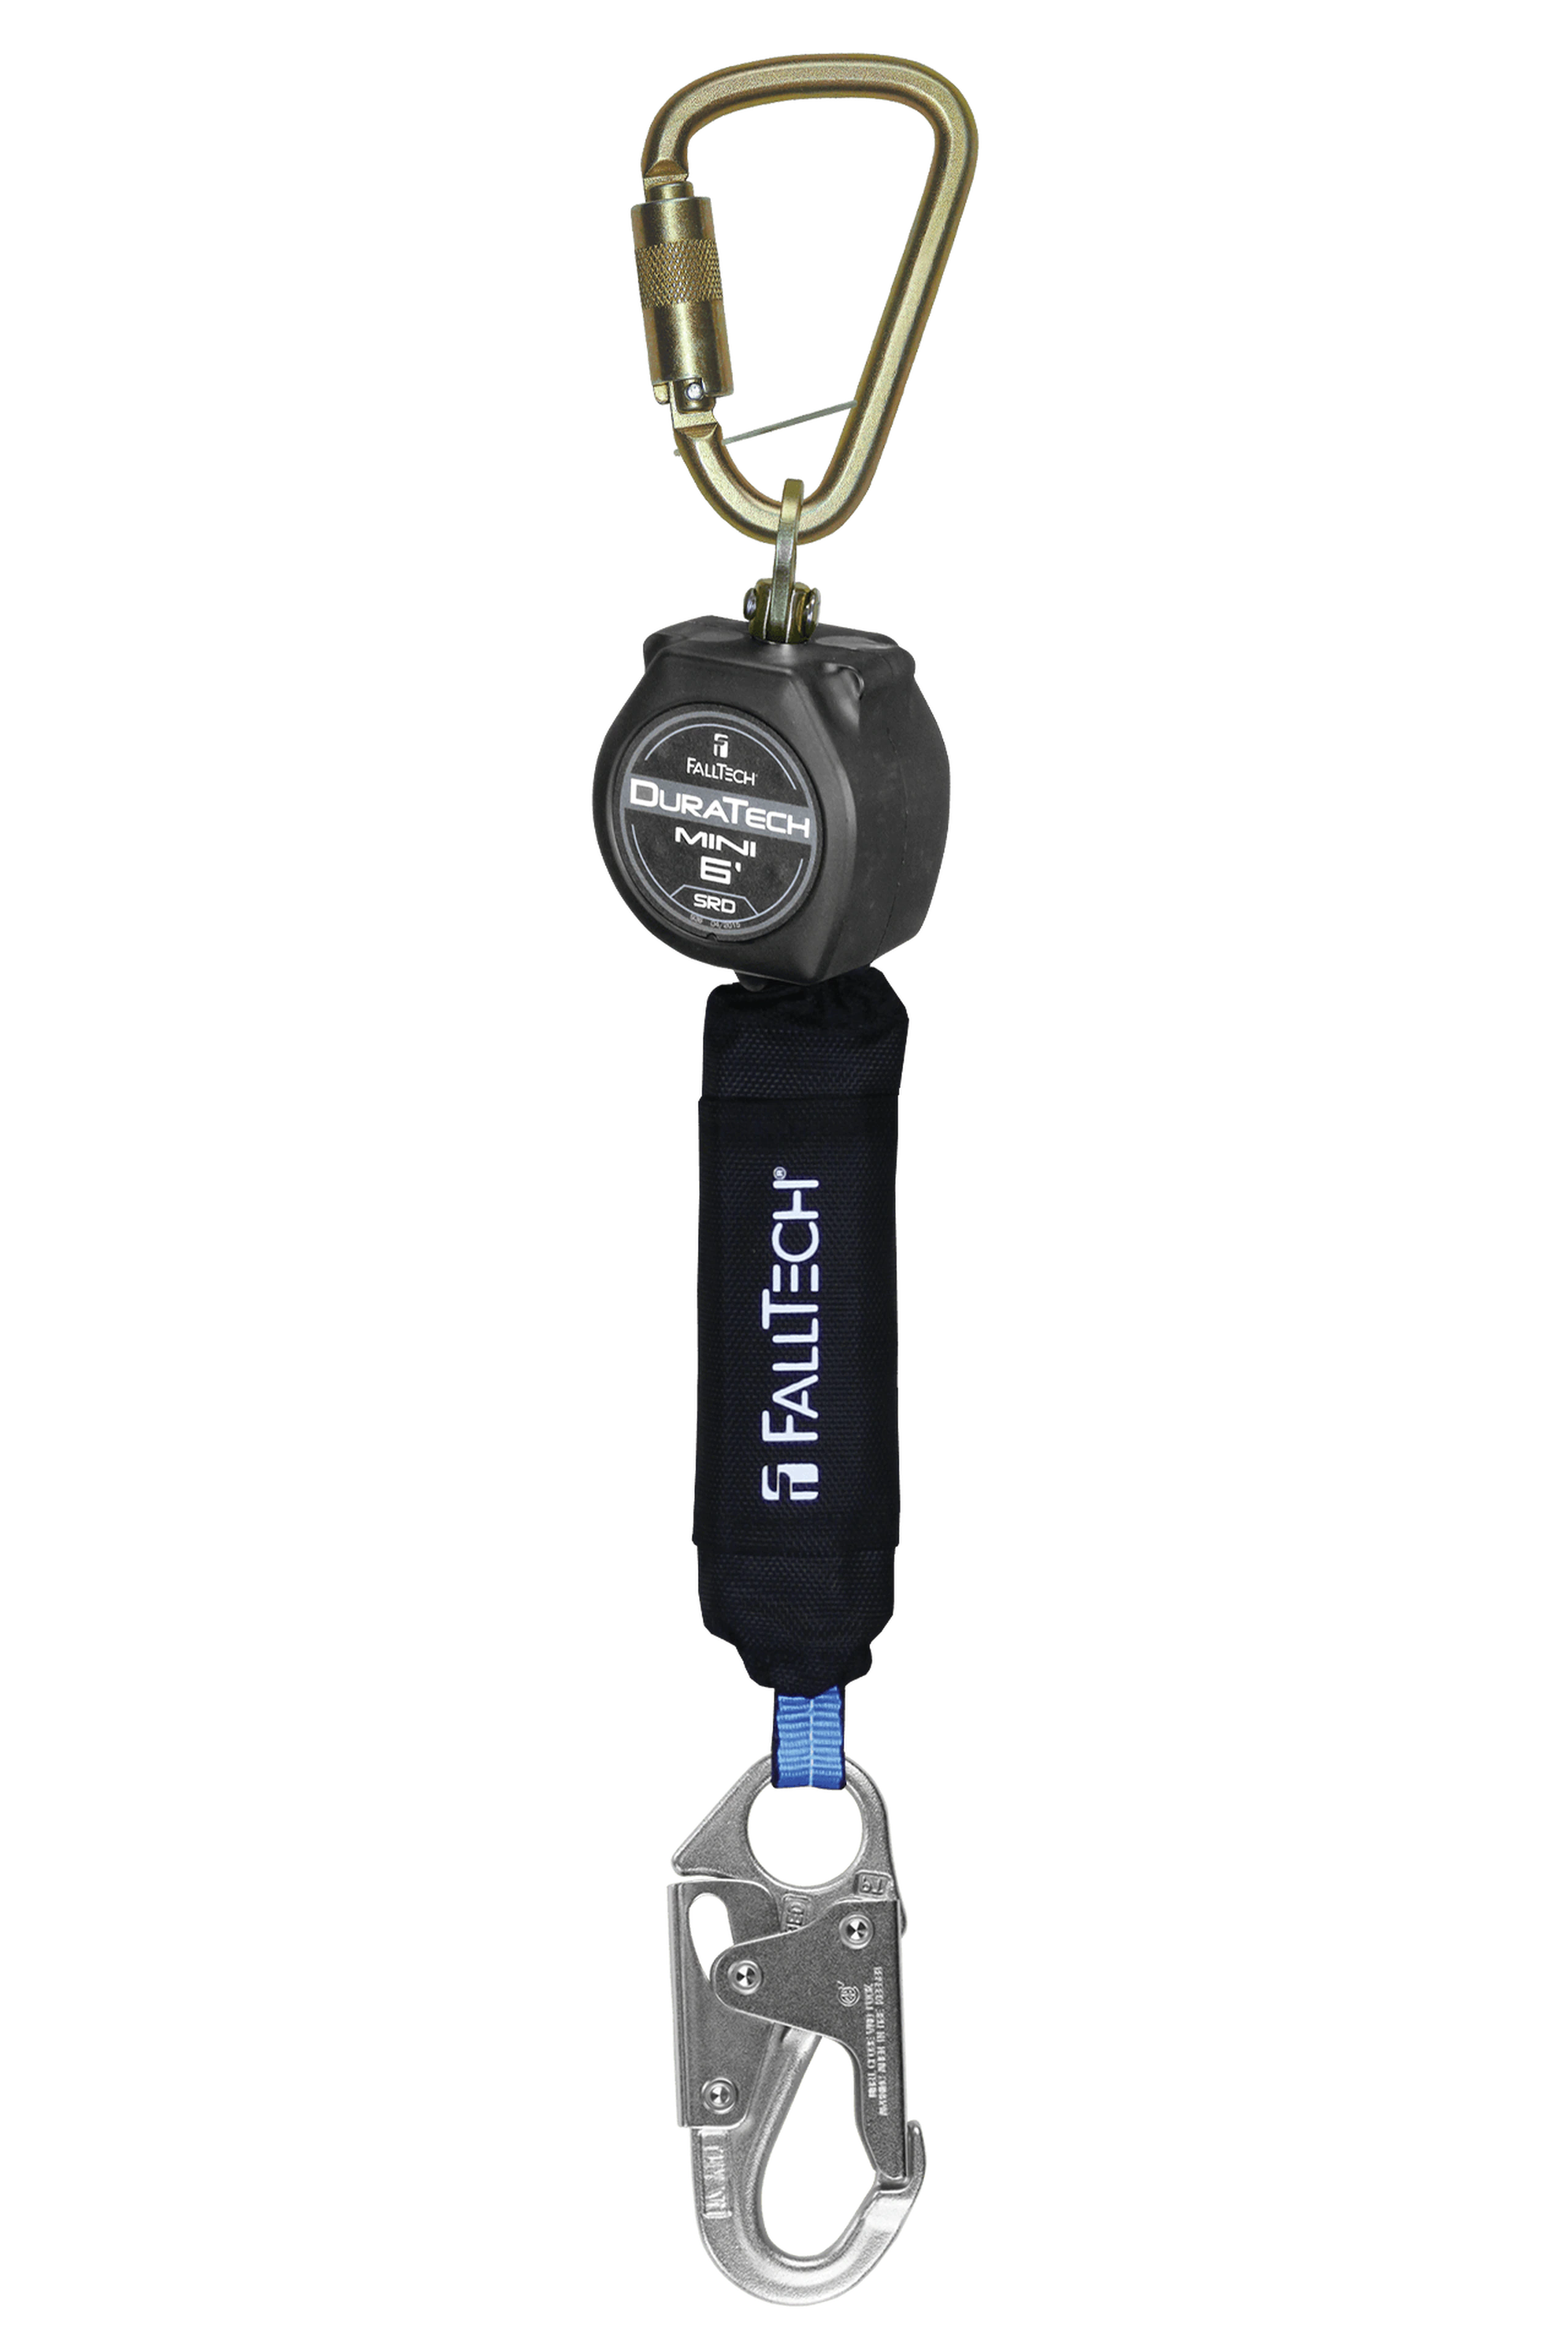 FallTech 72706SB1 6' Mini Personal SRL with Steel Snap Hook, Includes Steel Dorsal Connecting Carabiner (each)